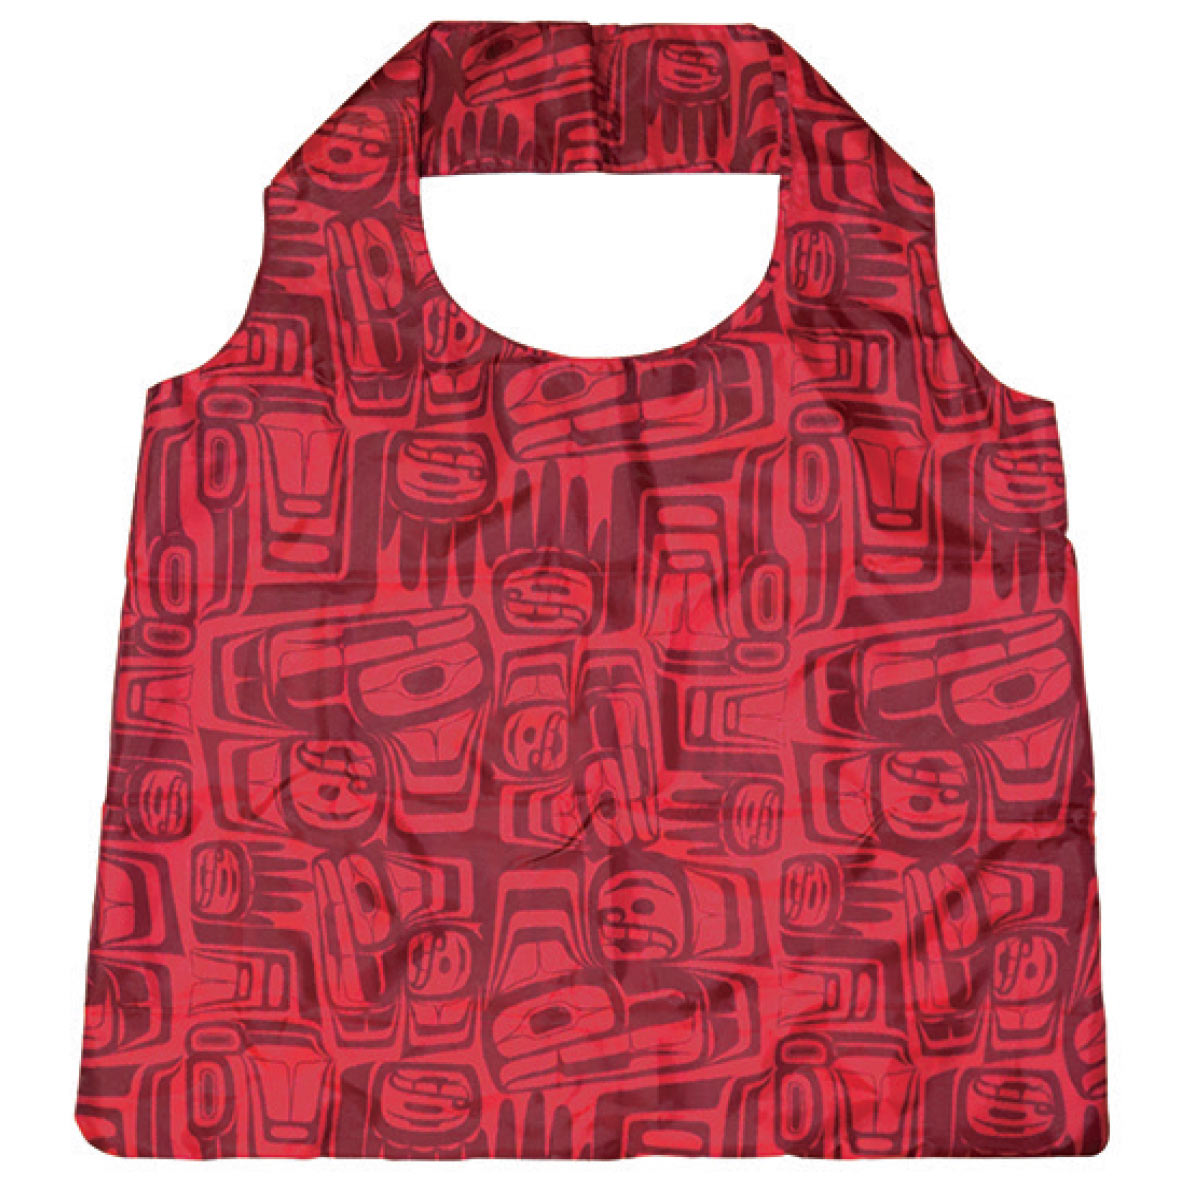 FOLDABLE SHOPPING BAGS - Ben Houstie Eagle Crest Red - FBAG17 - House of Himwitsa Native Art Gallery and Gifts